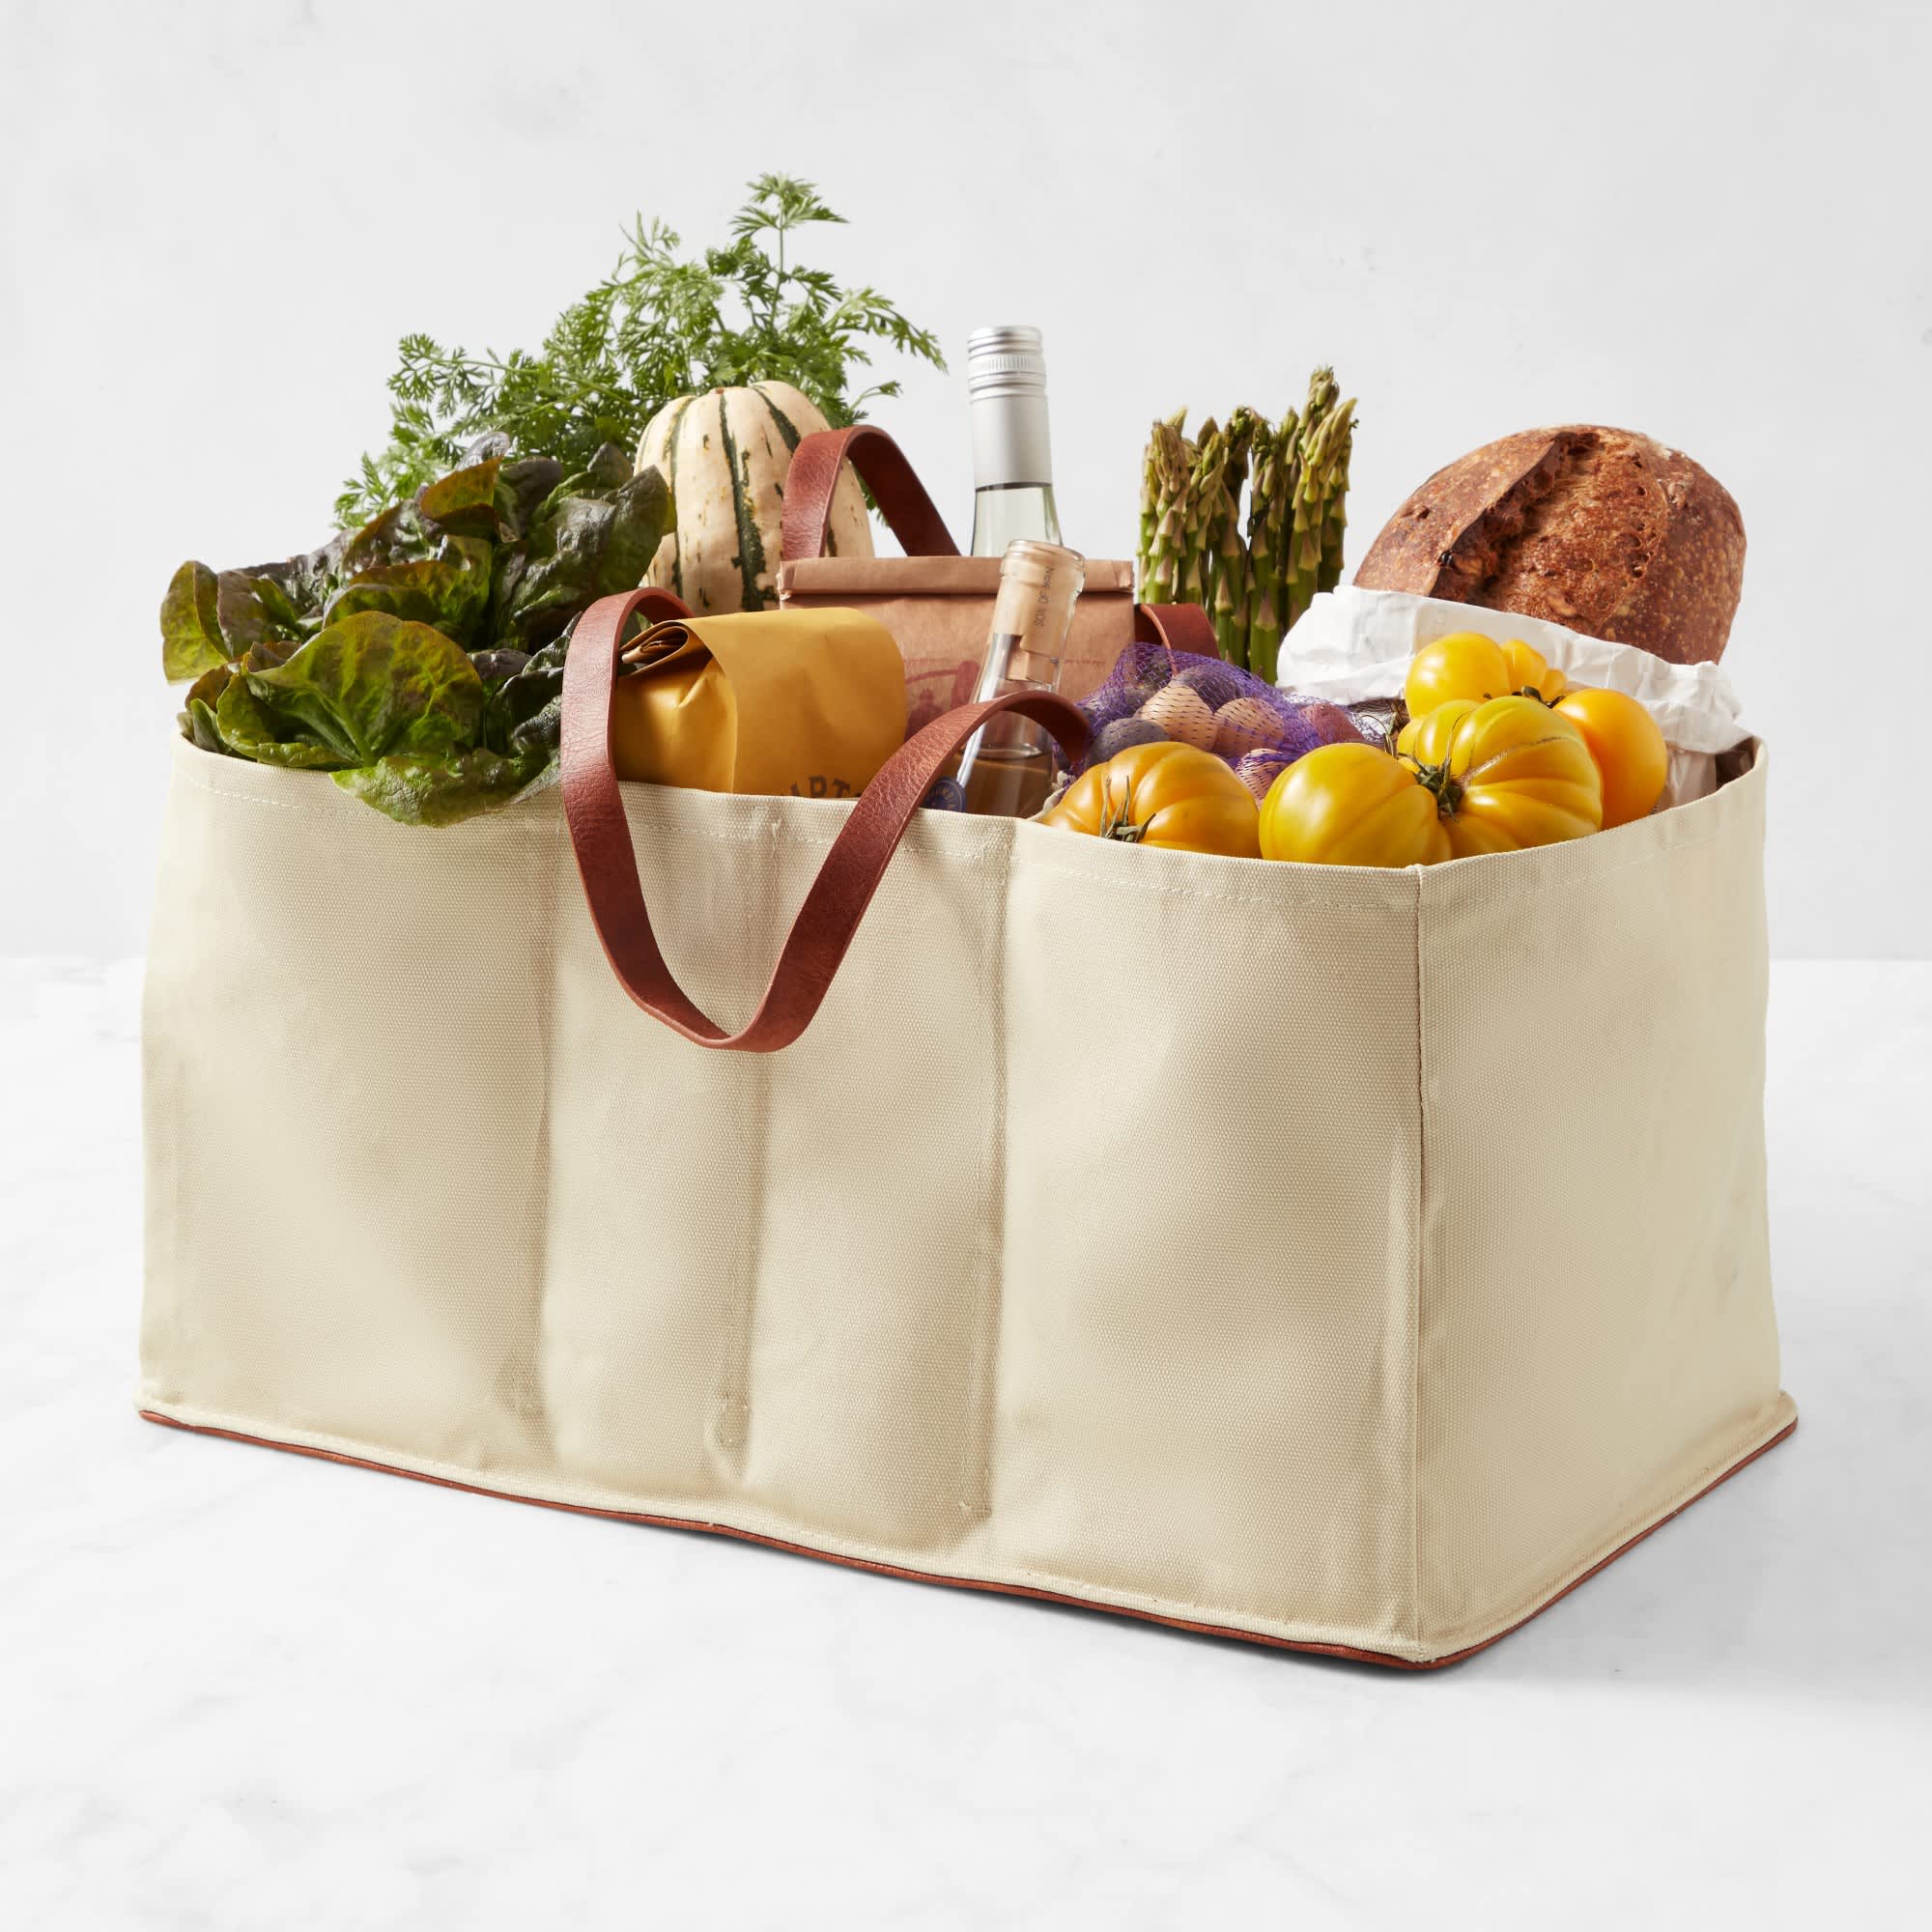 11 Best Insulated Grocery Bags of 2023